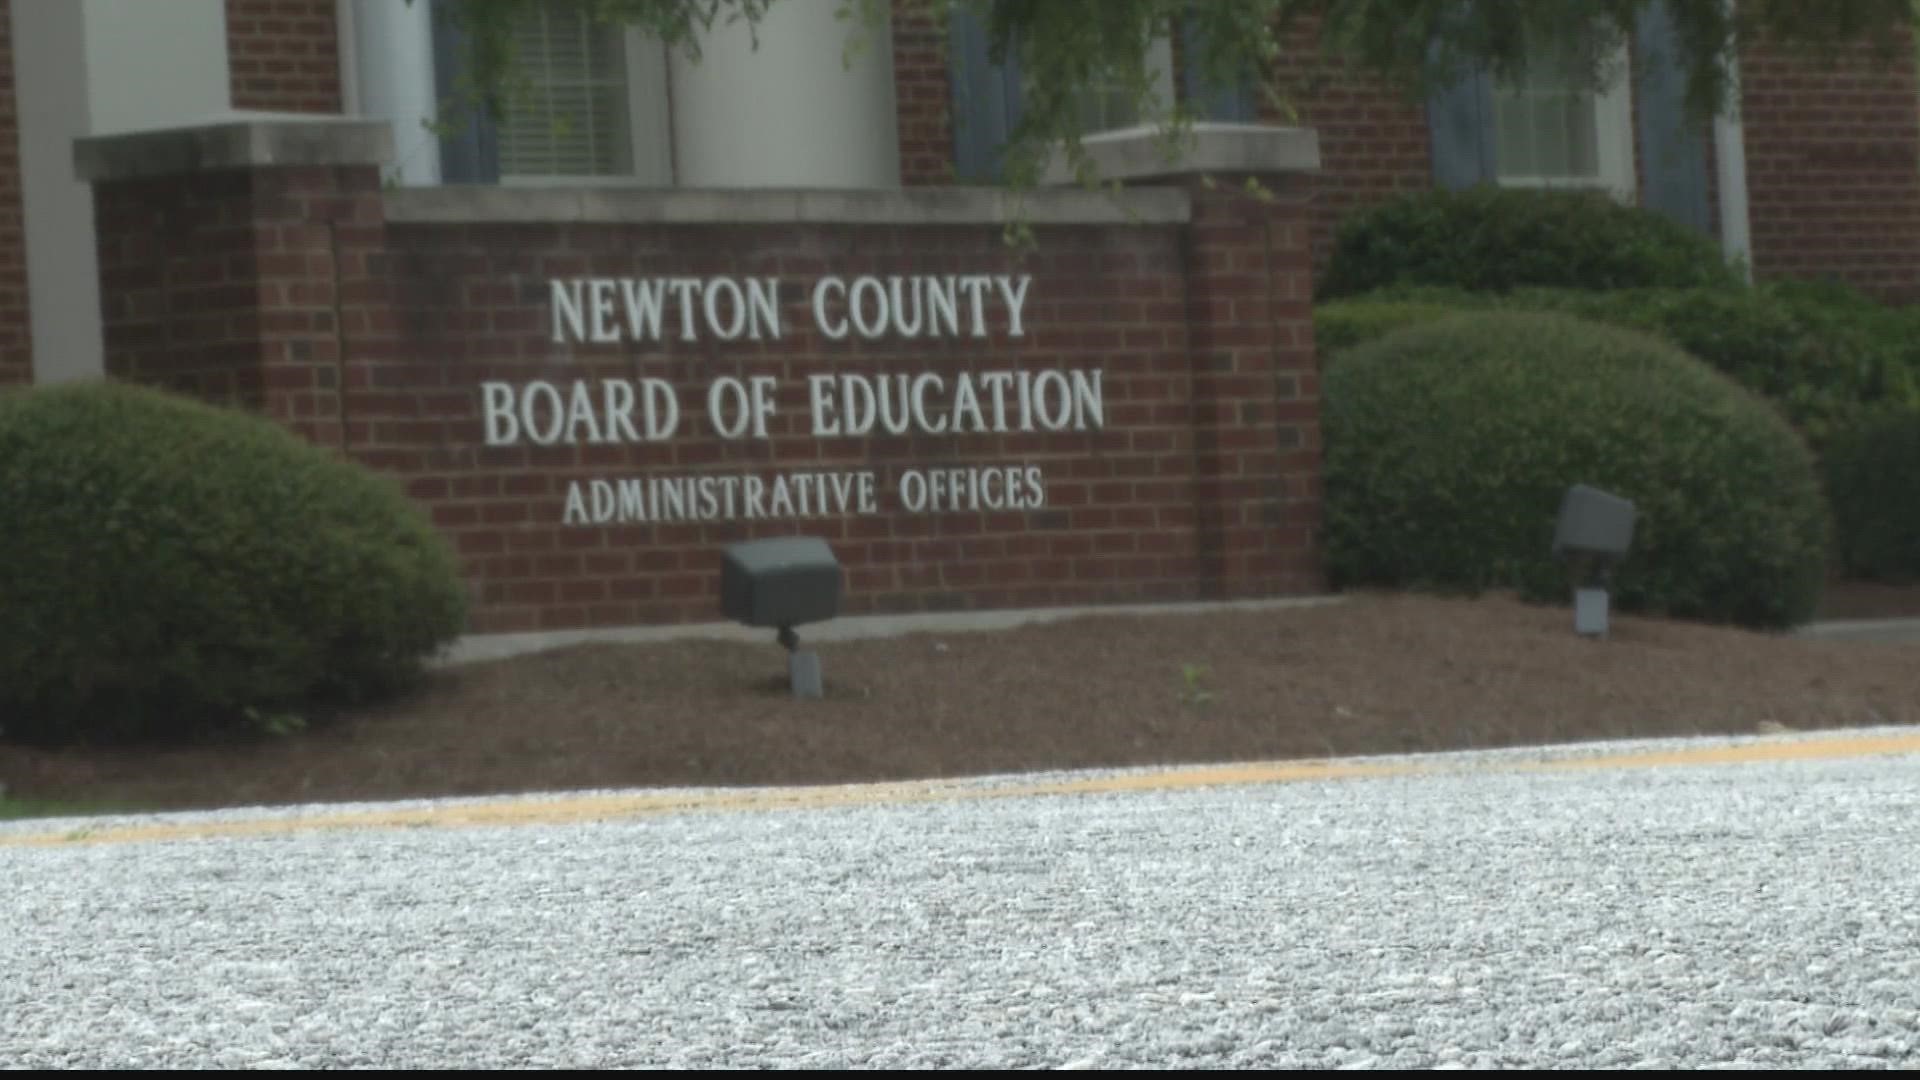 Newton County Schools said in a statement posted to their website that the student who tested positive attends Mansfield Elementary School.